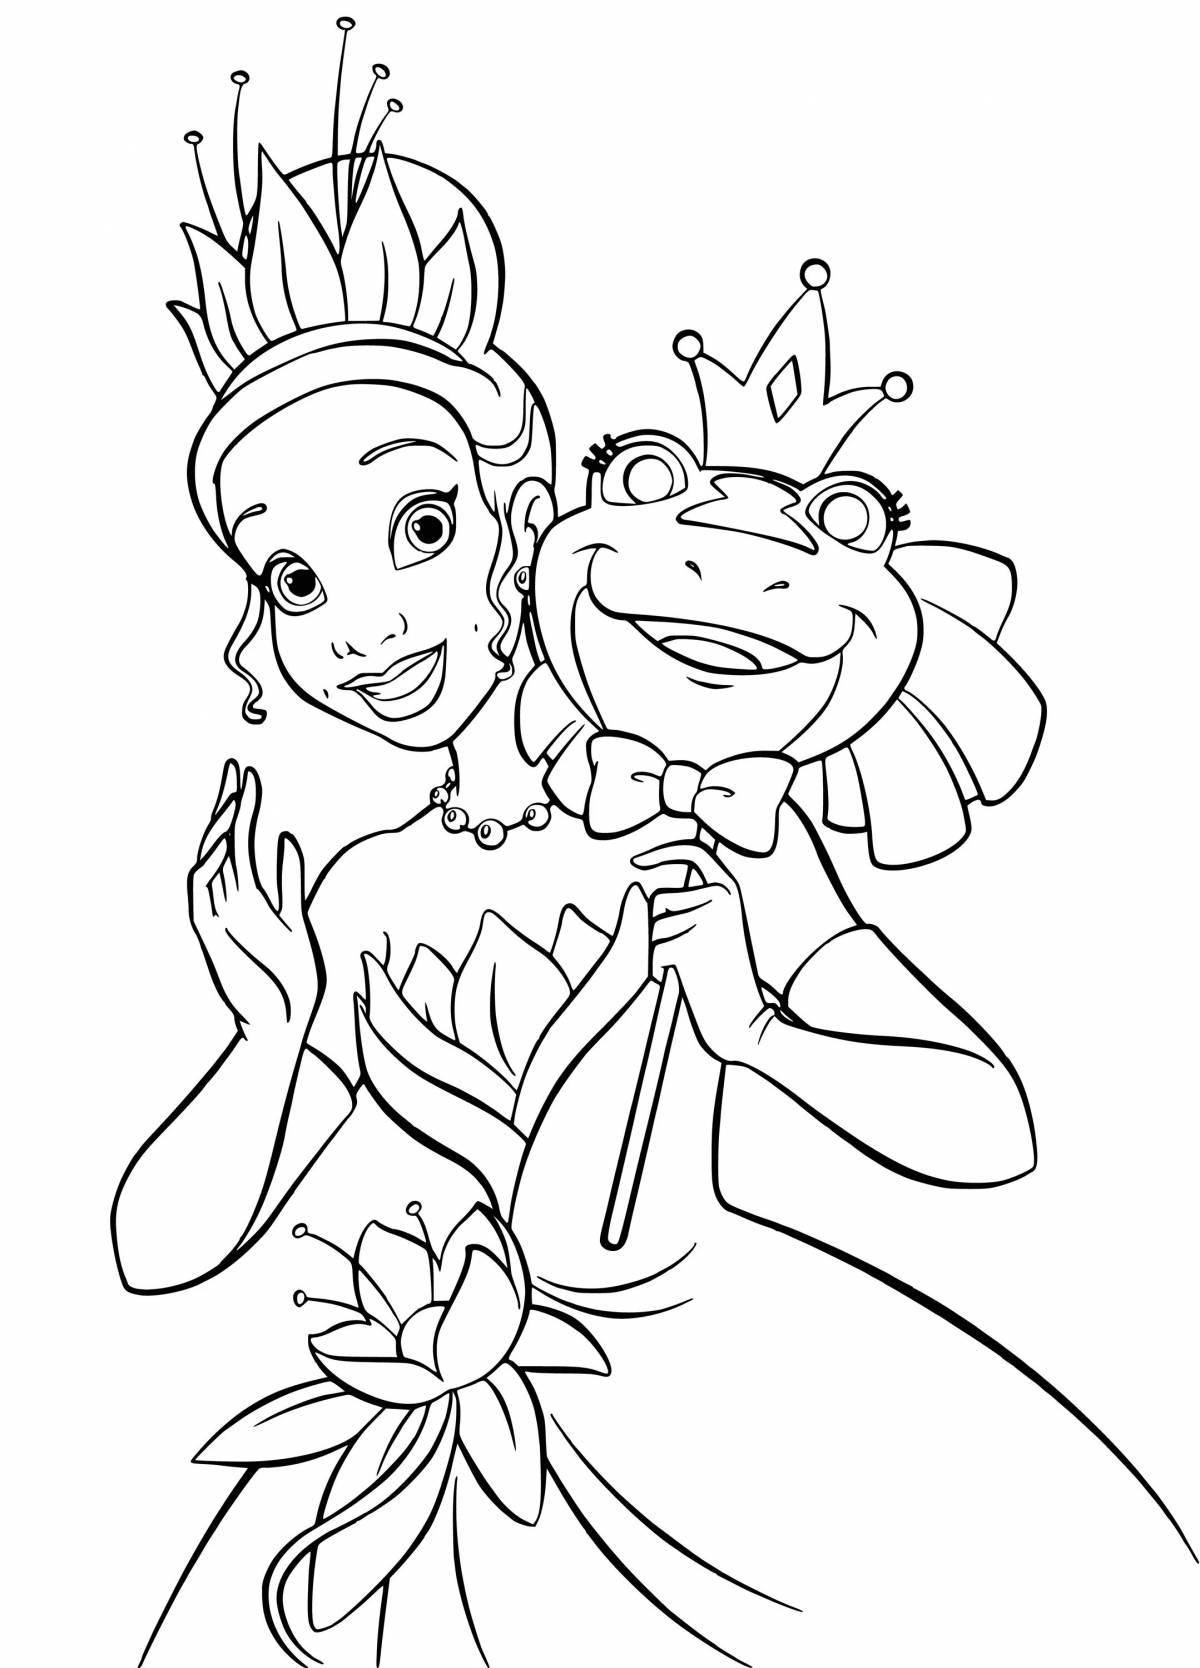 Coloring page charming tiana